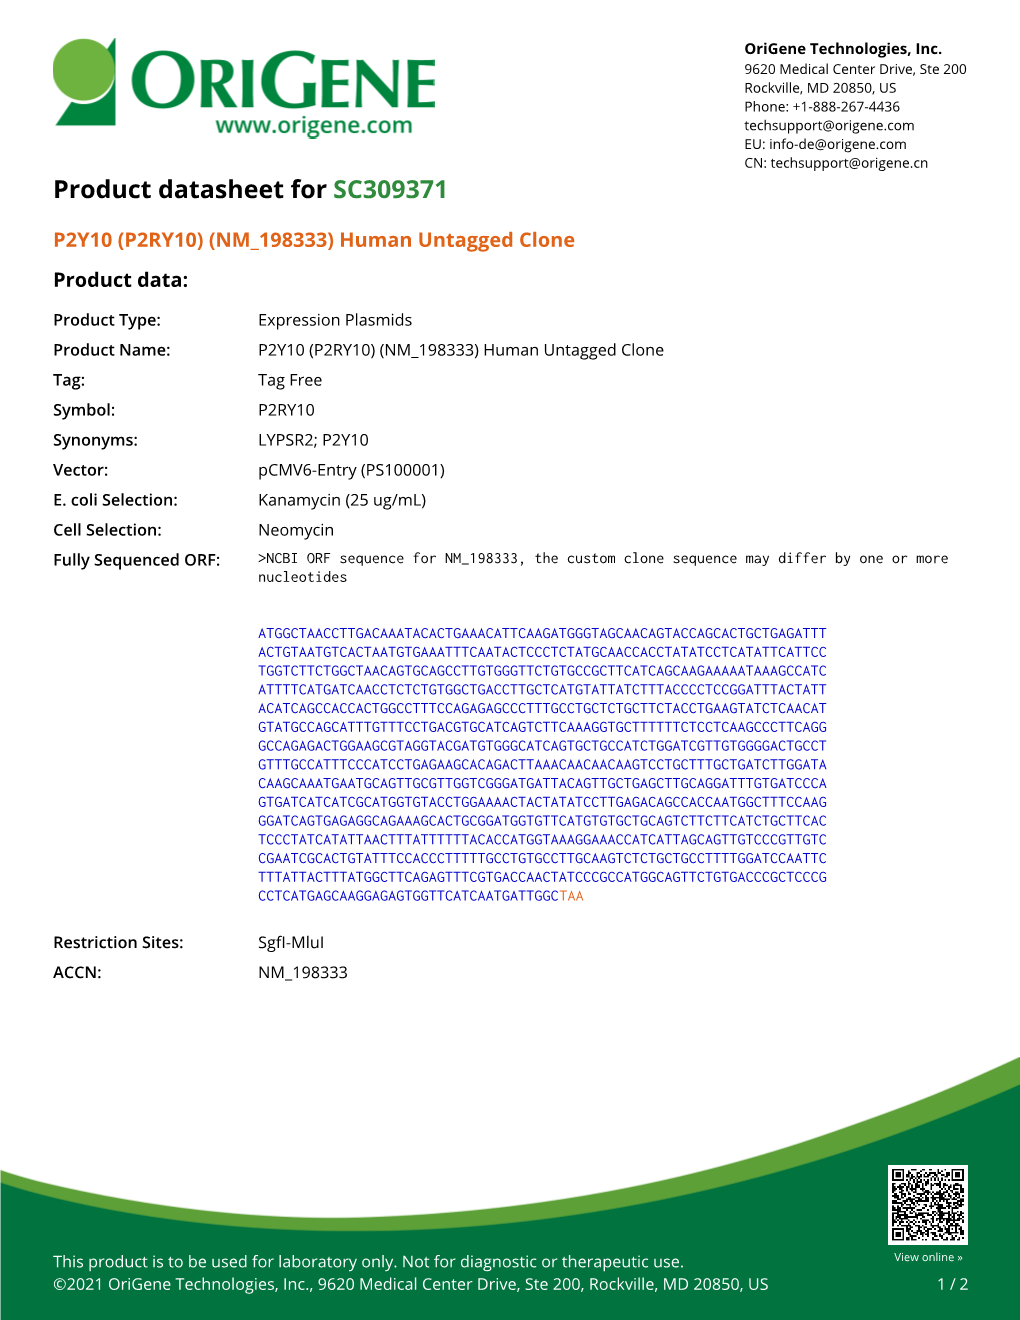 P2Y10 (P2RY10) (NM 198333) Human Untagged Clone Product Data